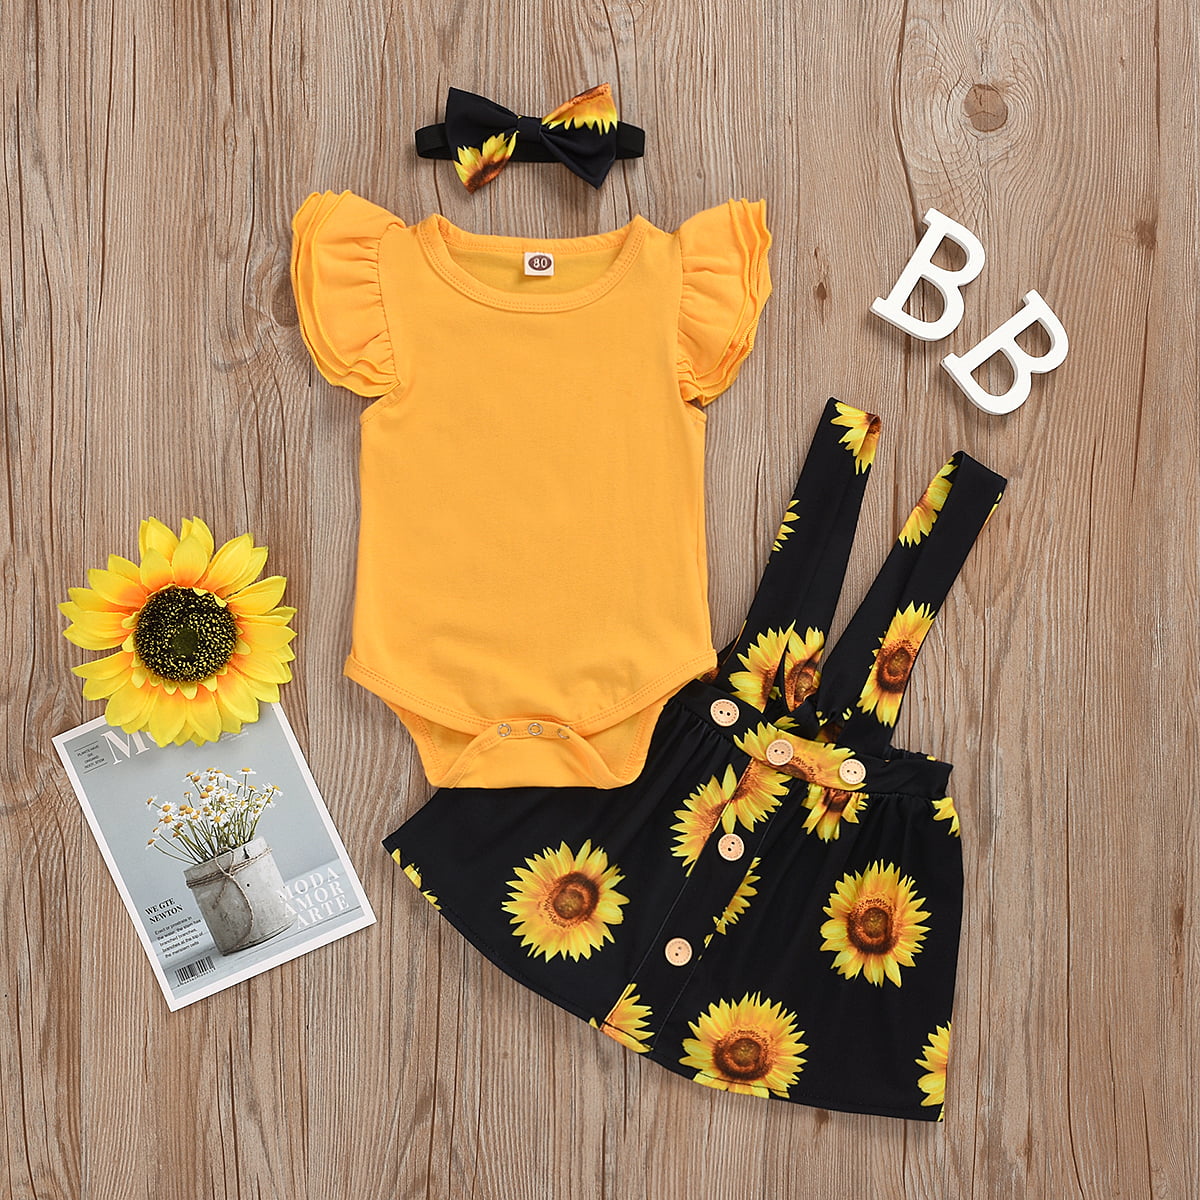 sunflower with bee romper baby girl summer romper outfit toddler girls romper yellow bee romper Sunflower outfit Sunflower romper